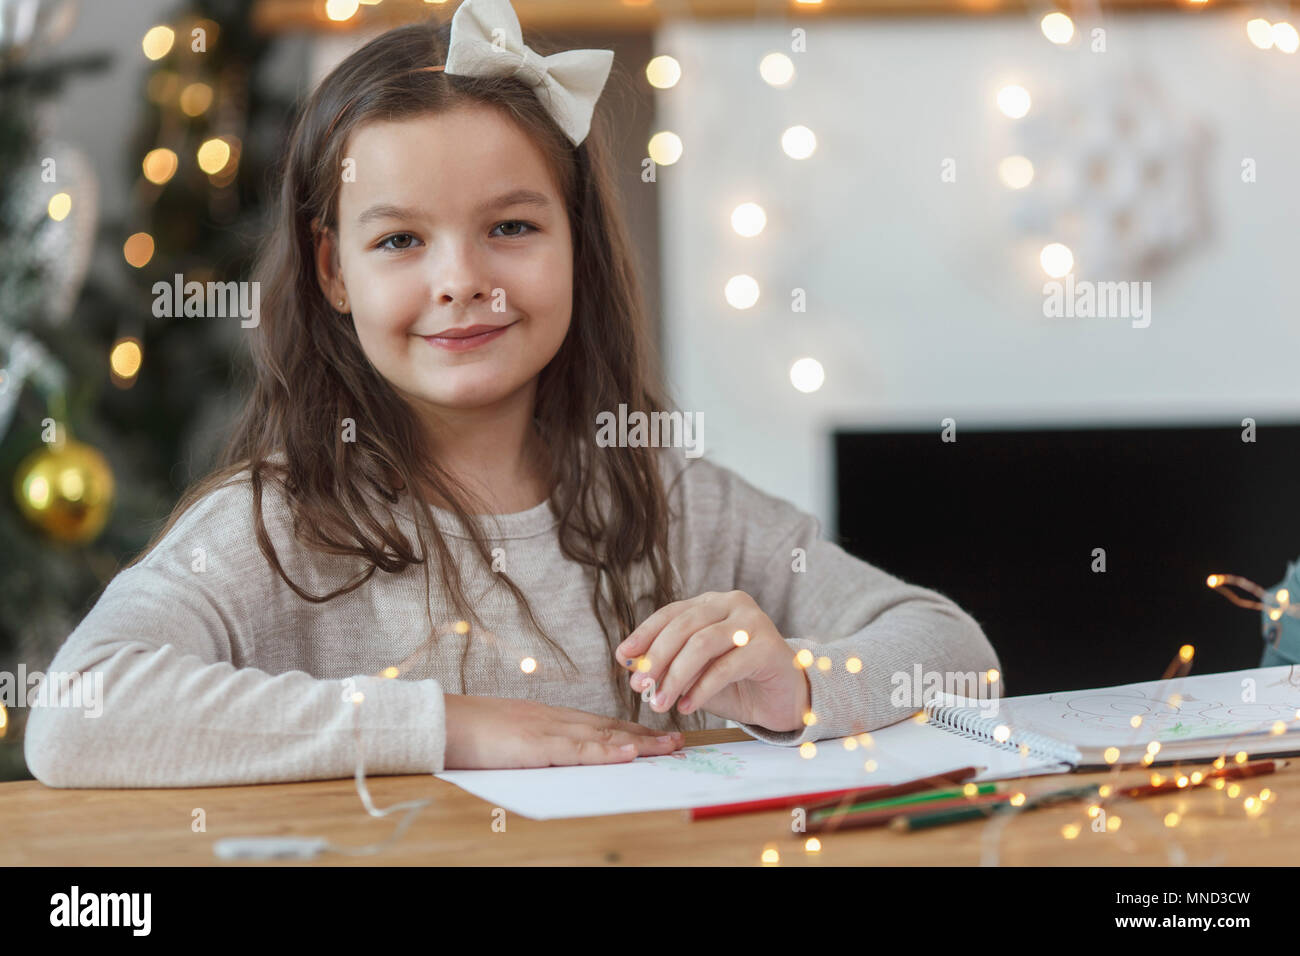 Portrait of smiling girl sitting at table with illuminated string lights Stock Photo